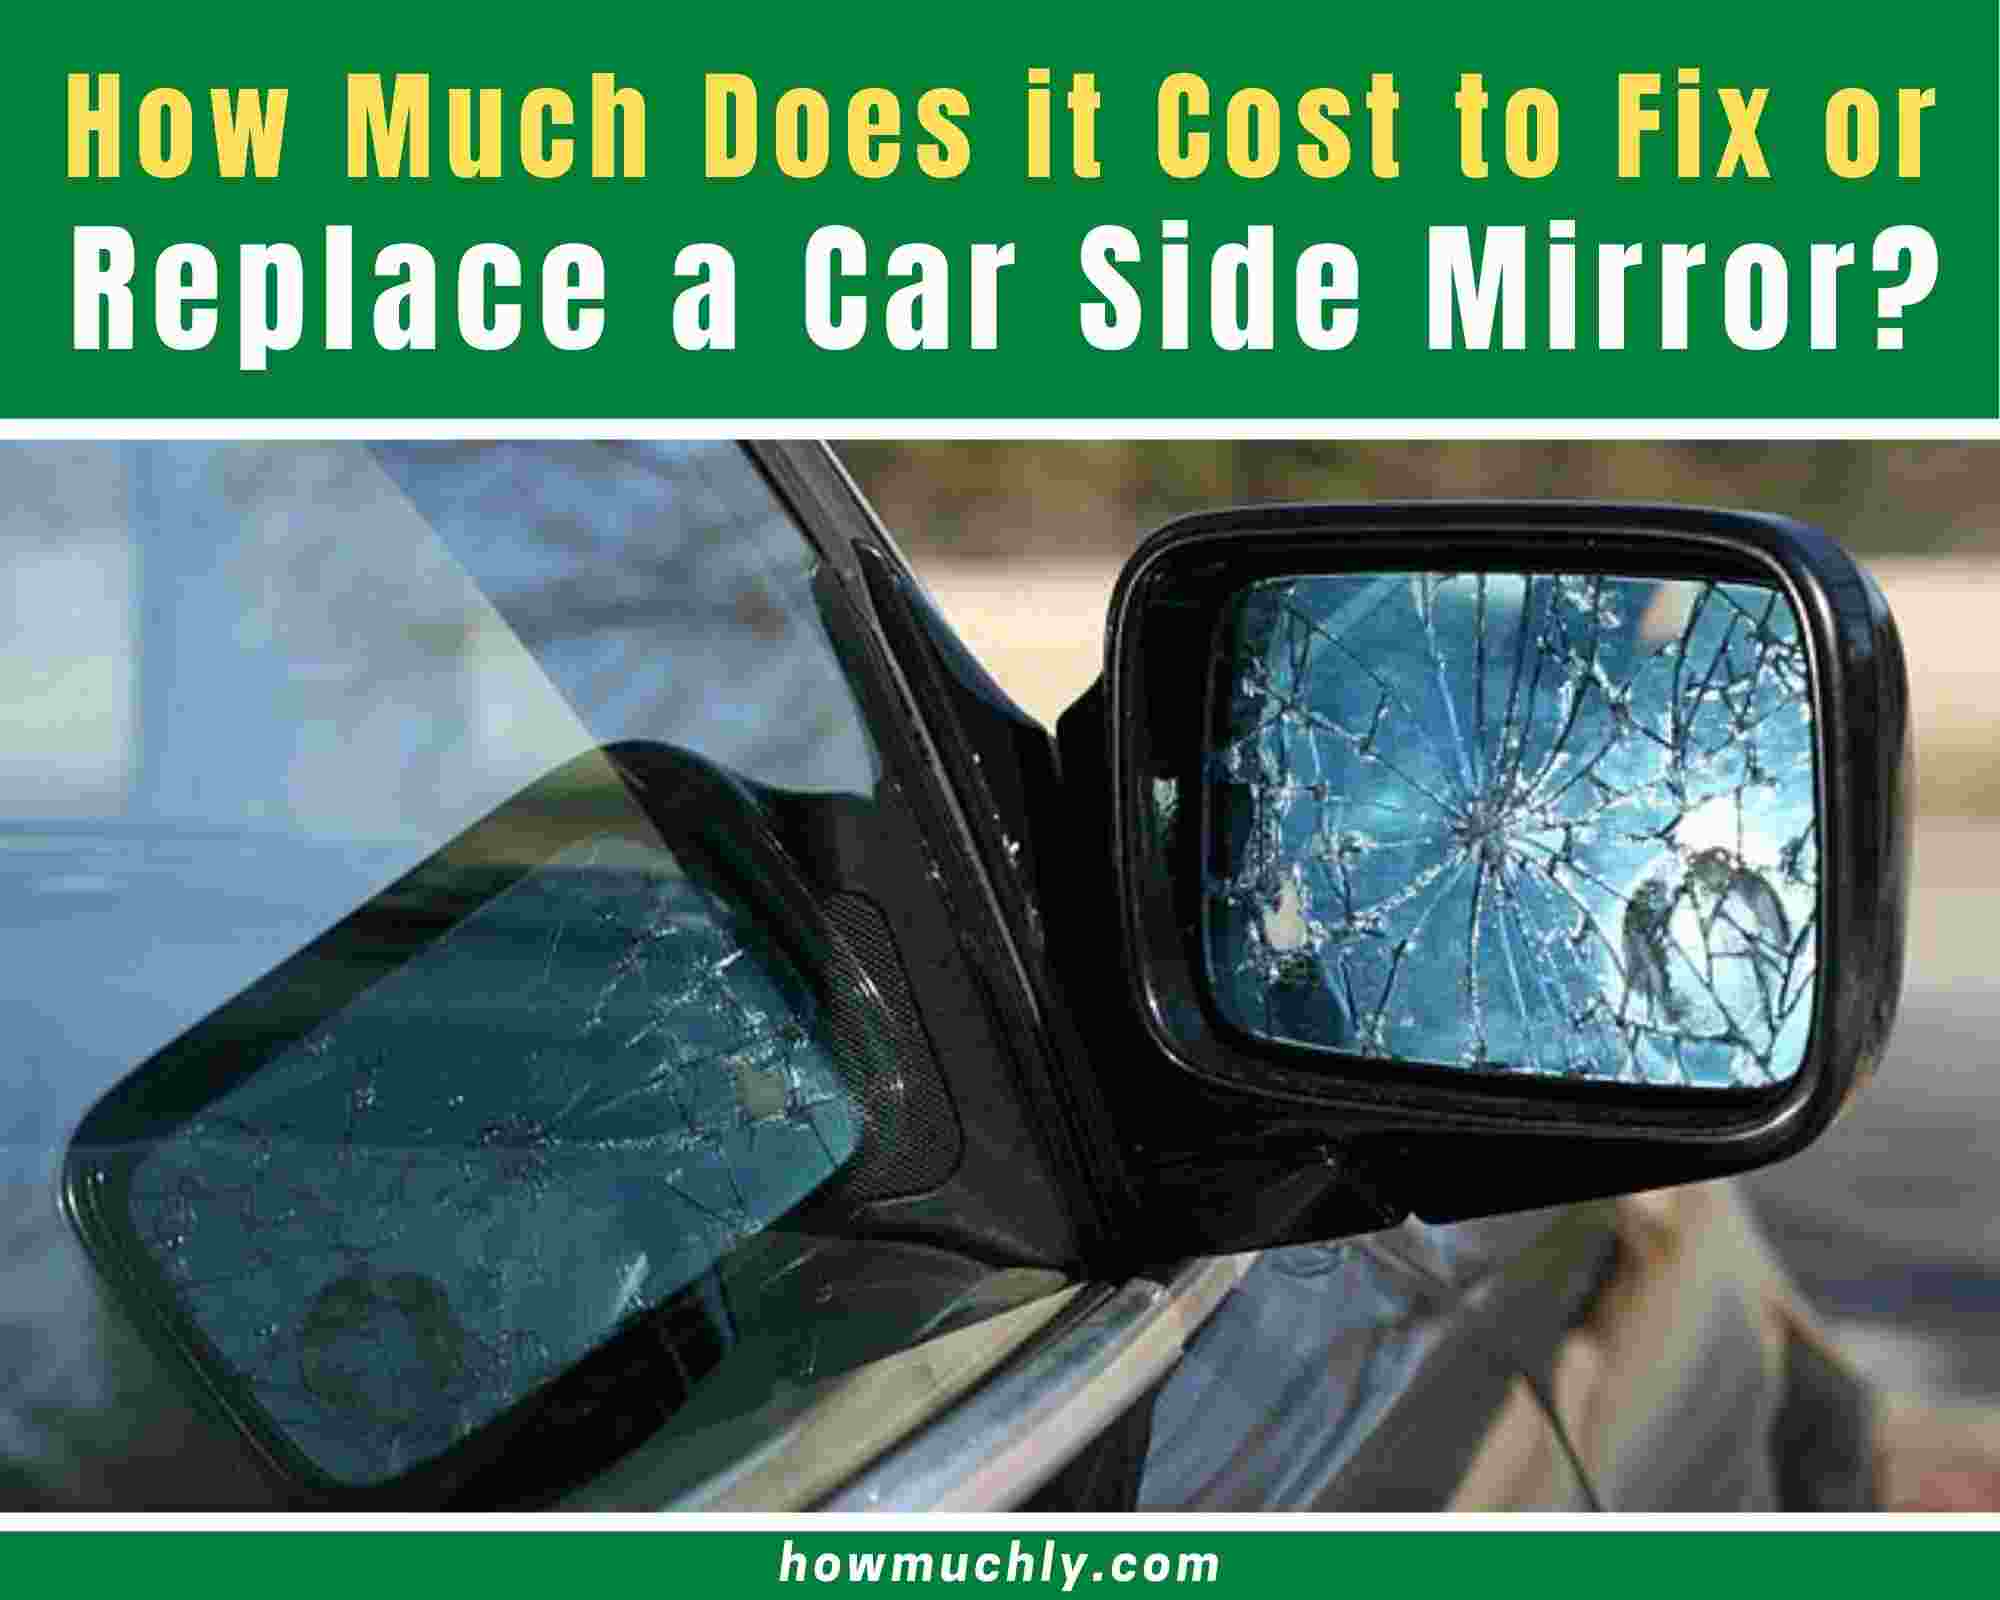 Cost To Replace A Side Mirror On Car, How Much Does Glass Mirror Cost